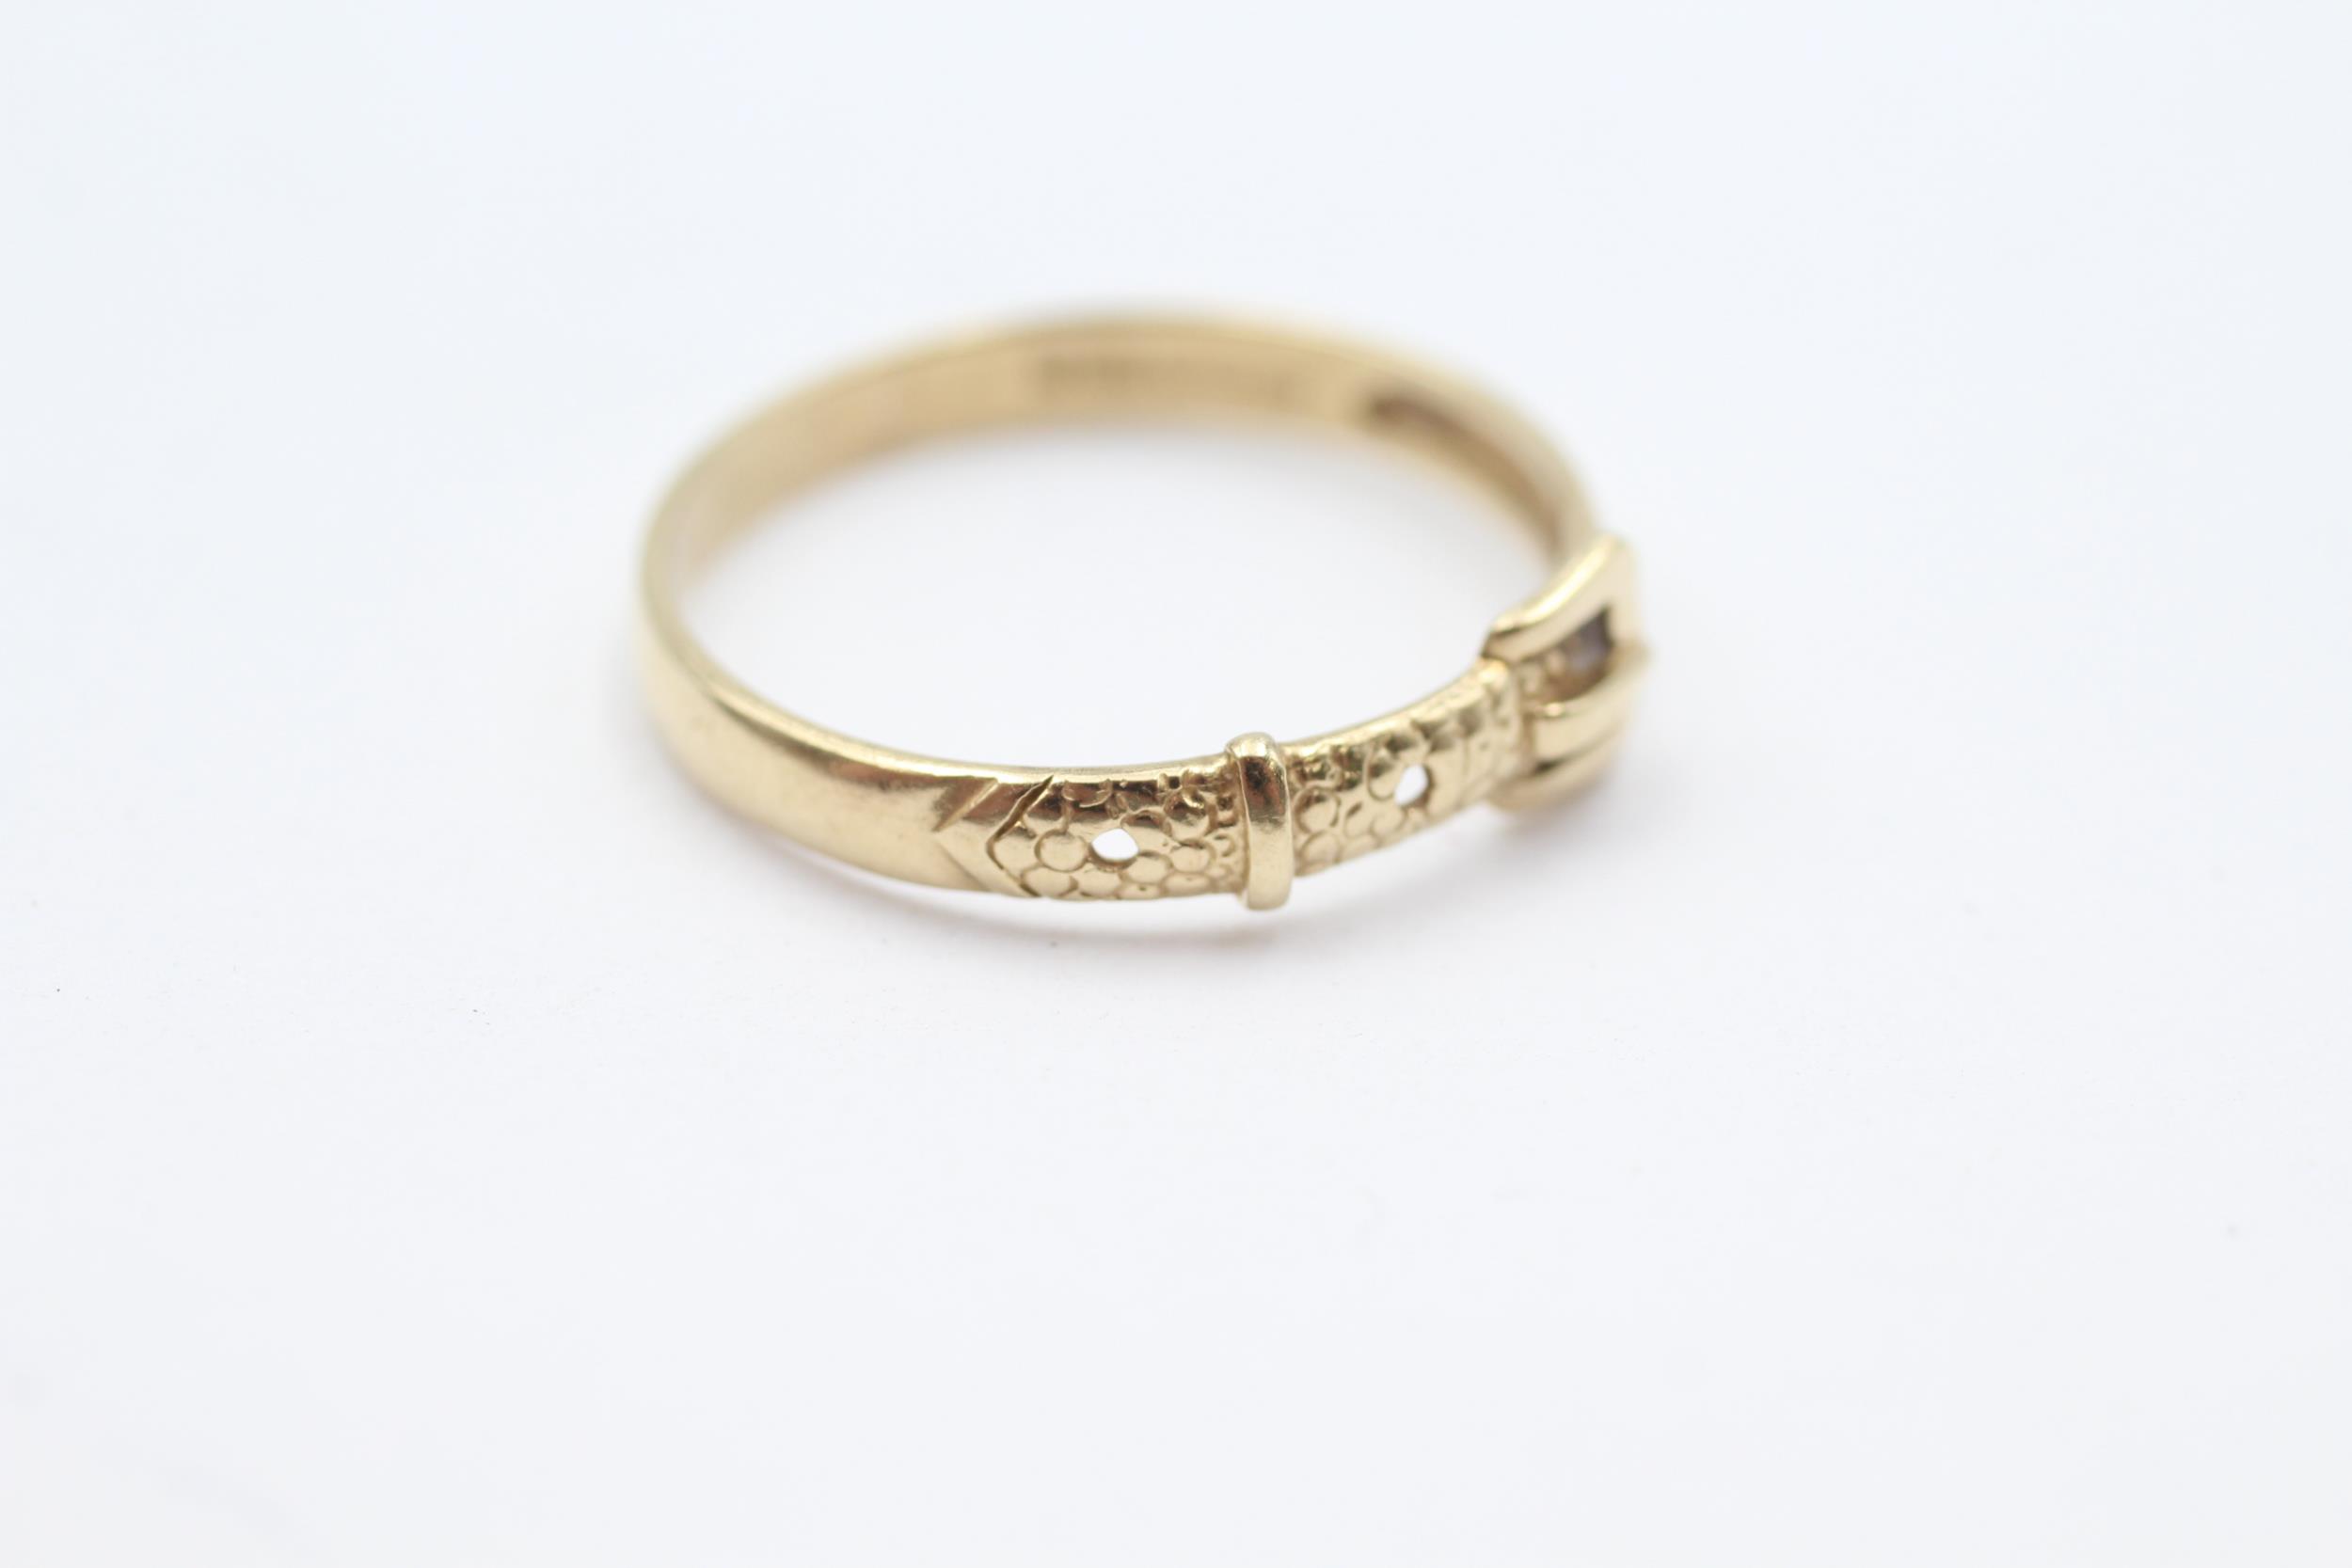 9ct gold buckle ring Size P - 1.3 g - Image 2 of 4